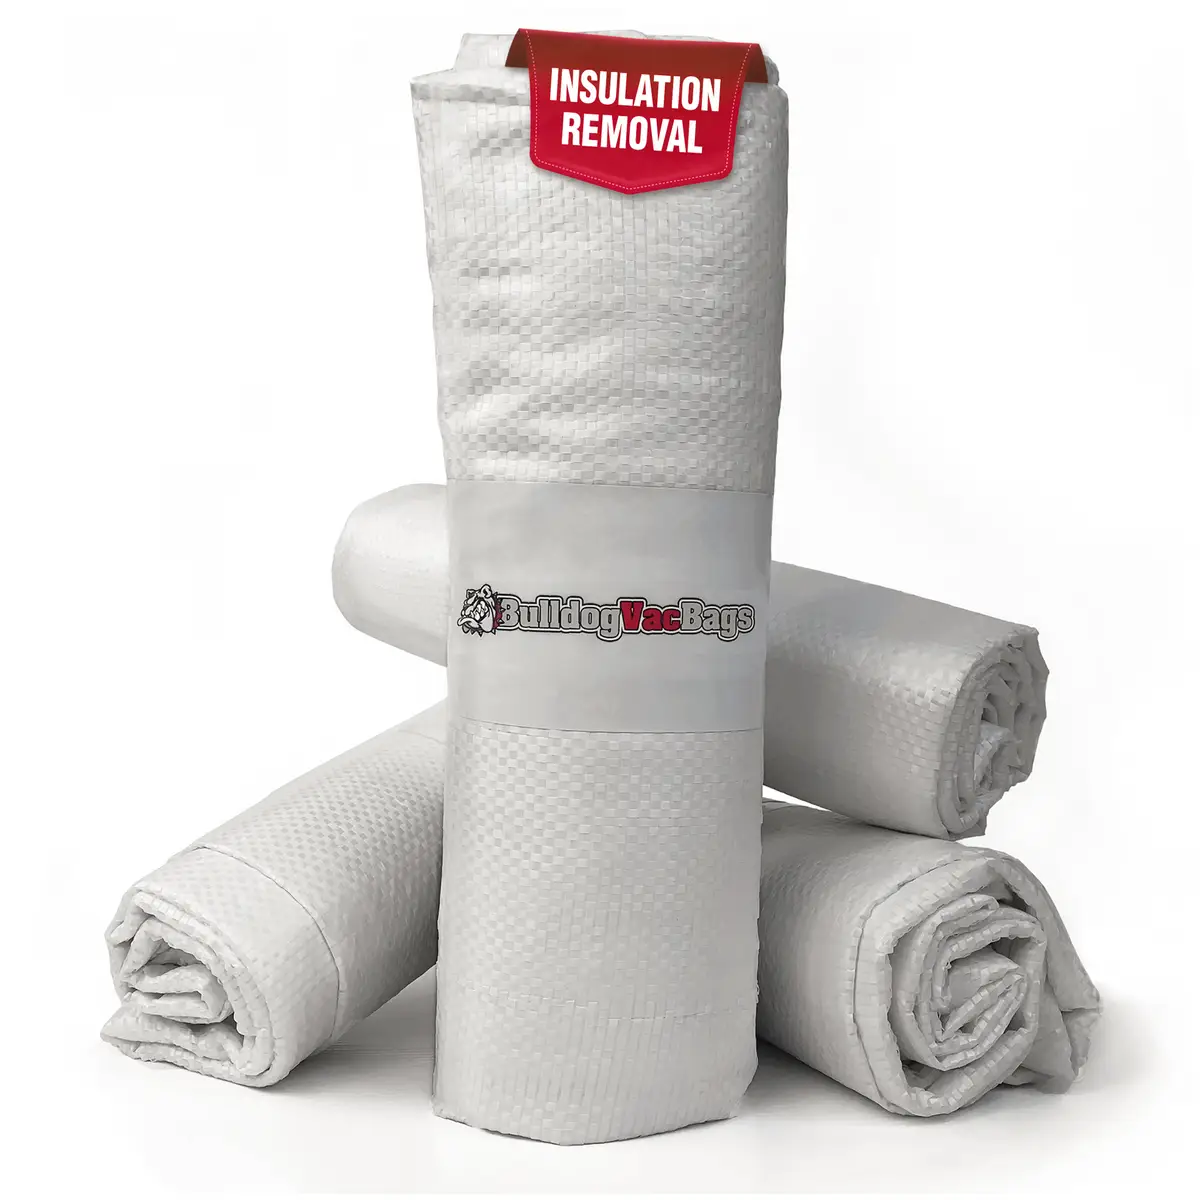 Multipurpose Insulation Removal Bags with a no-tear guarantee